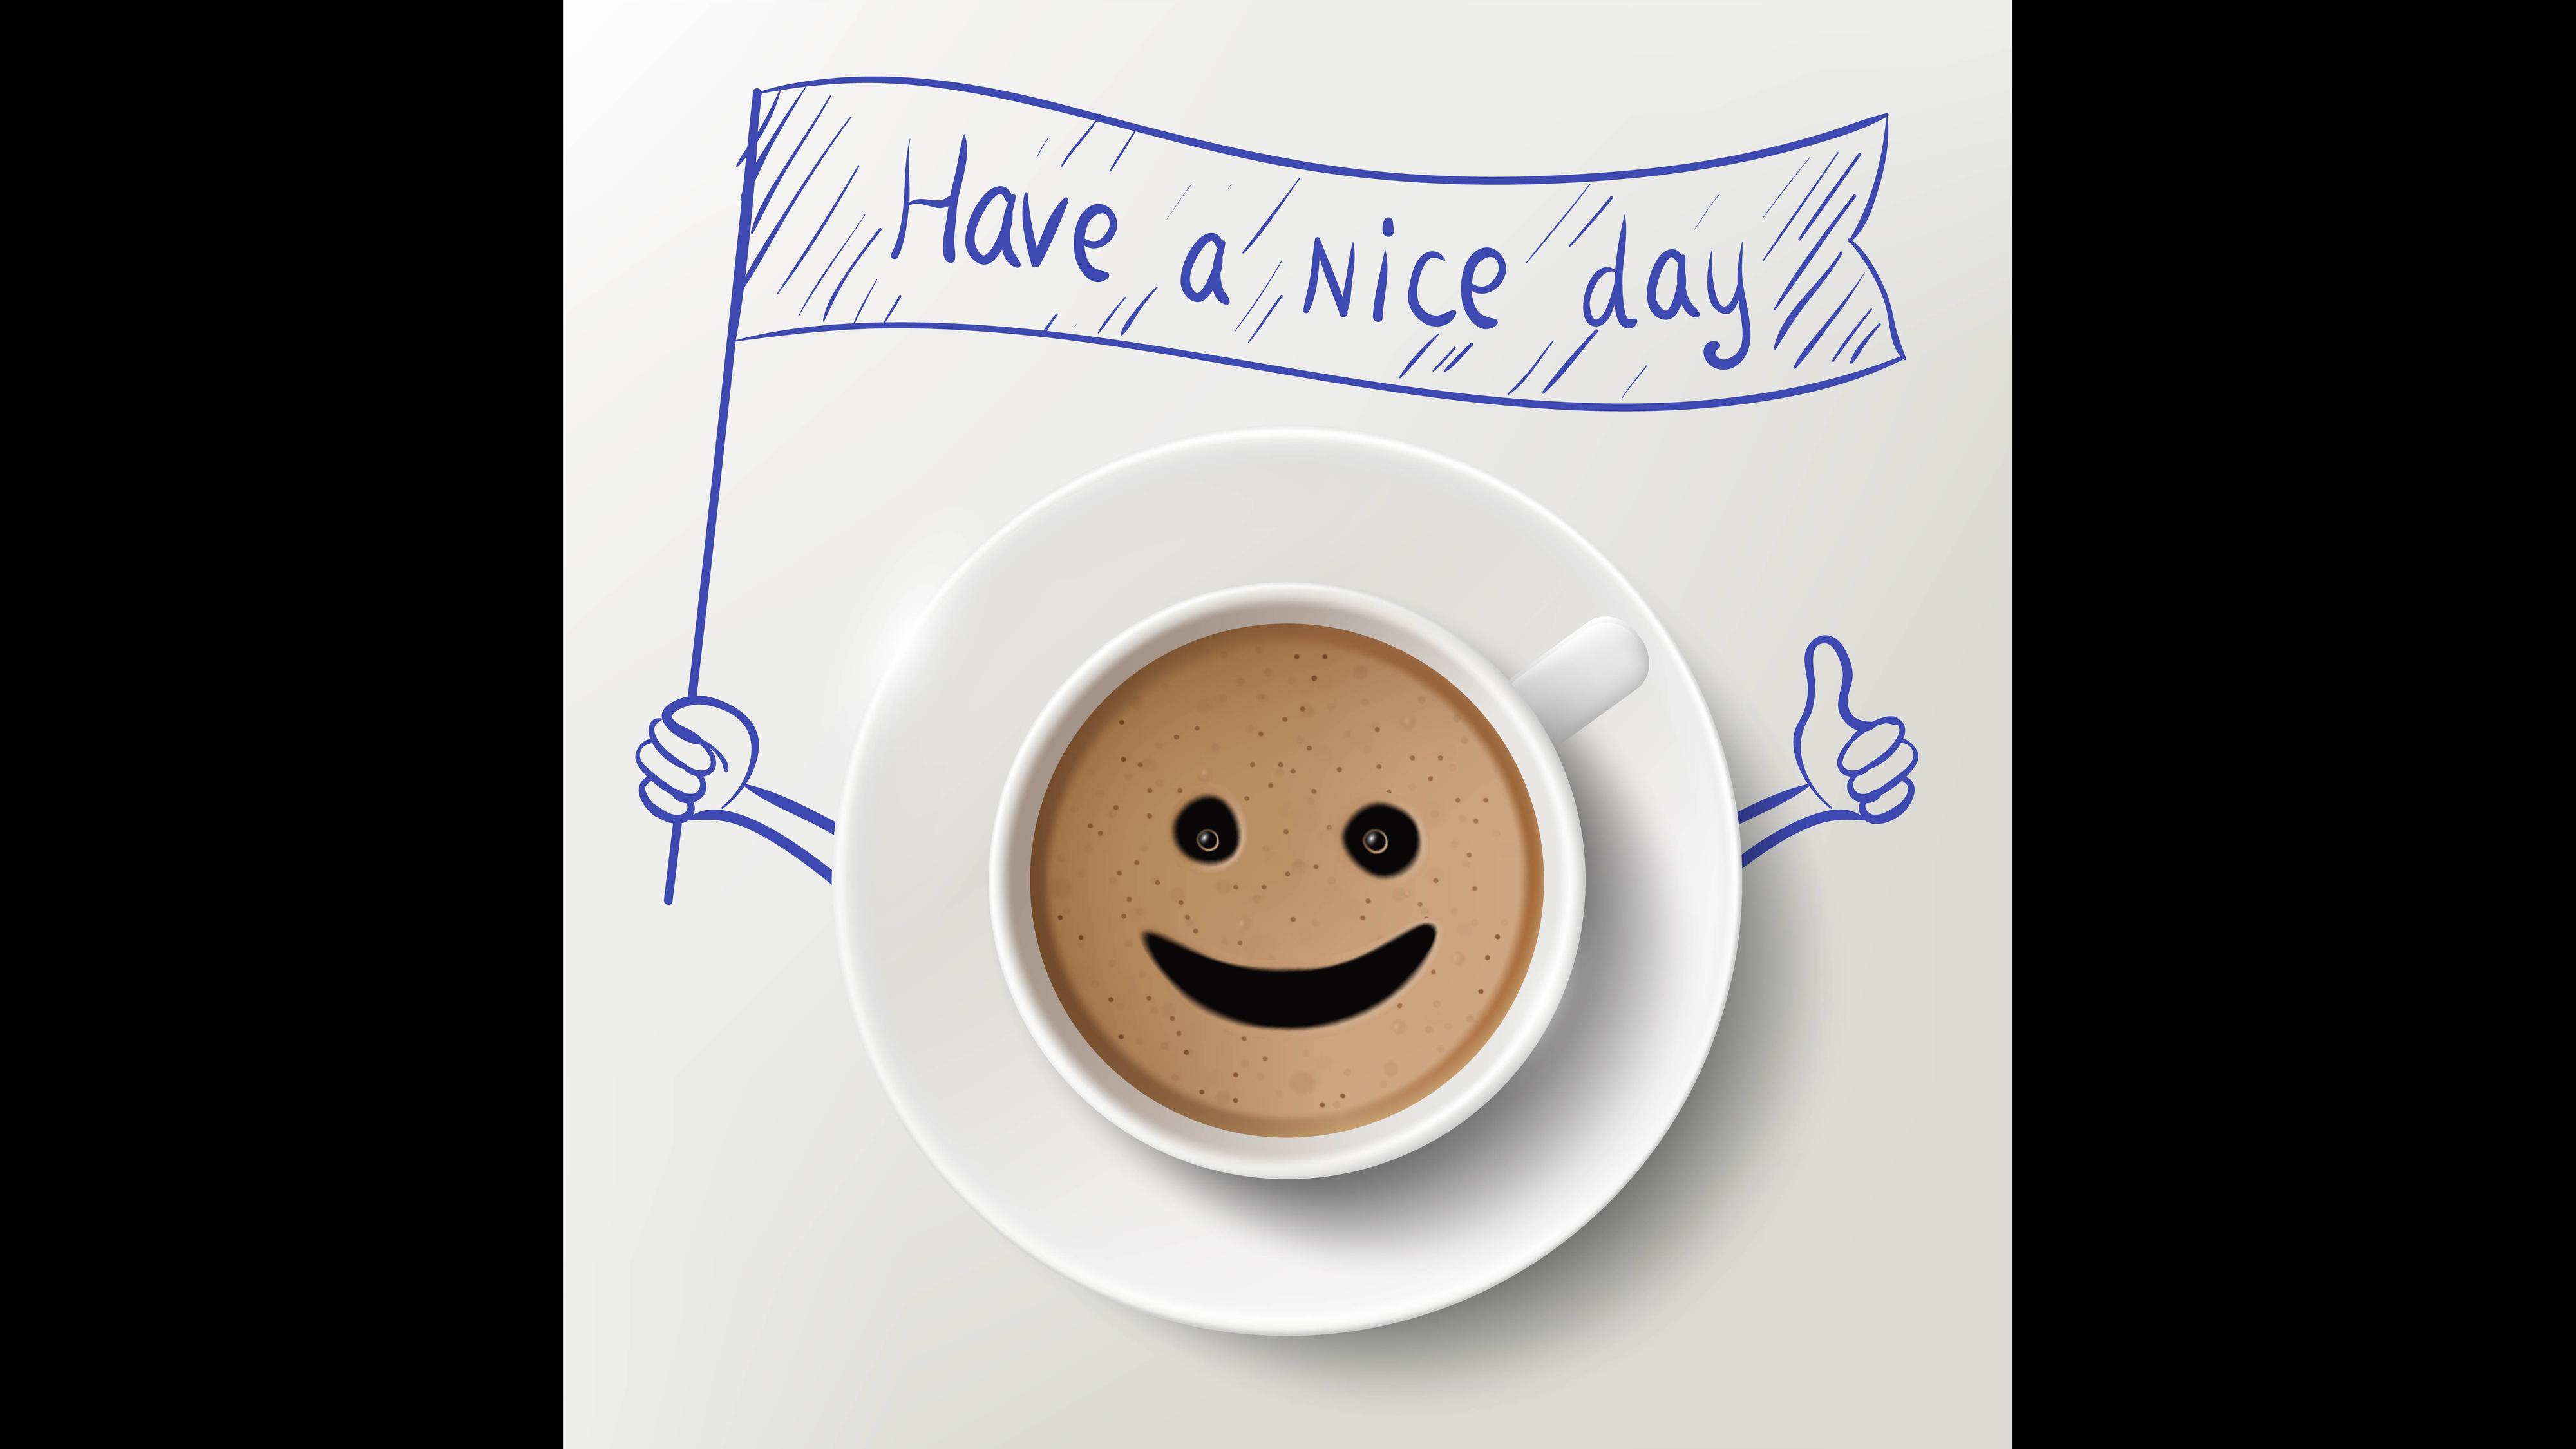 Un smiley avec l'expression "Have a nice day". [Depositphoto]